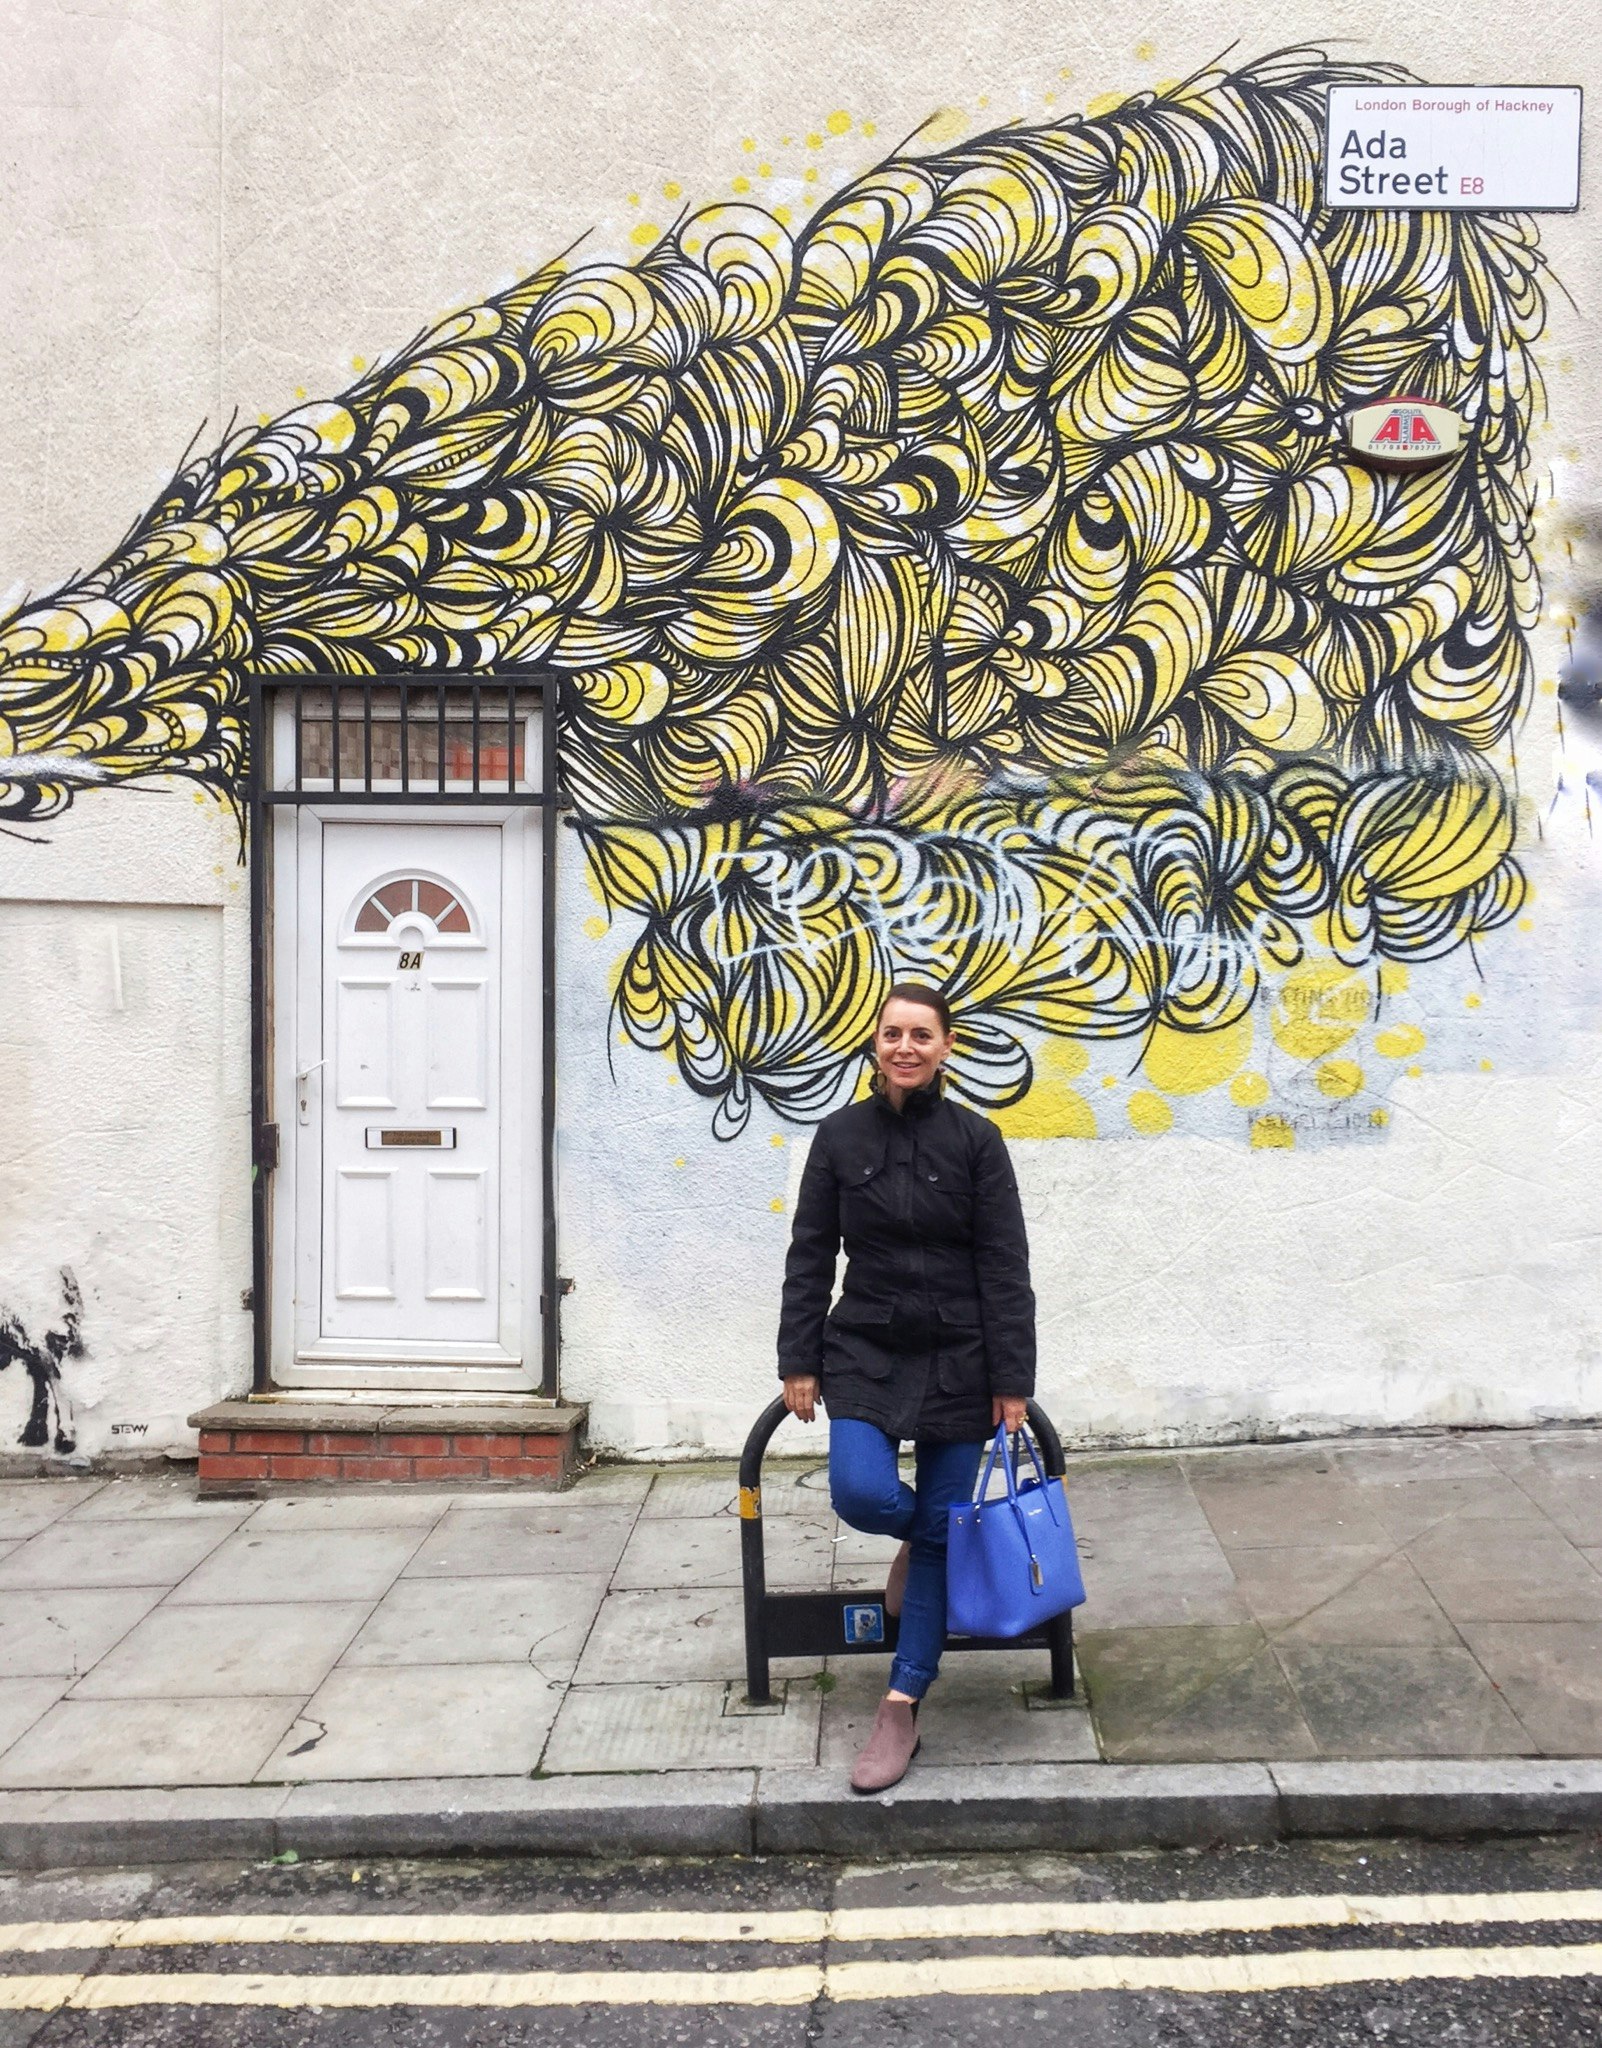 The writer, Nardia, poses in front of a yellow and black mural on Ada Street in east London.